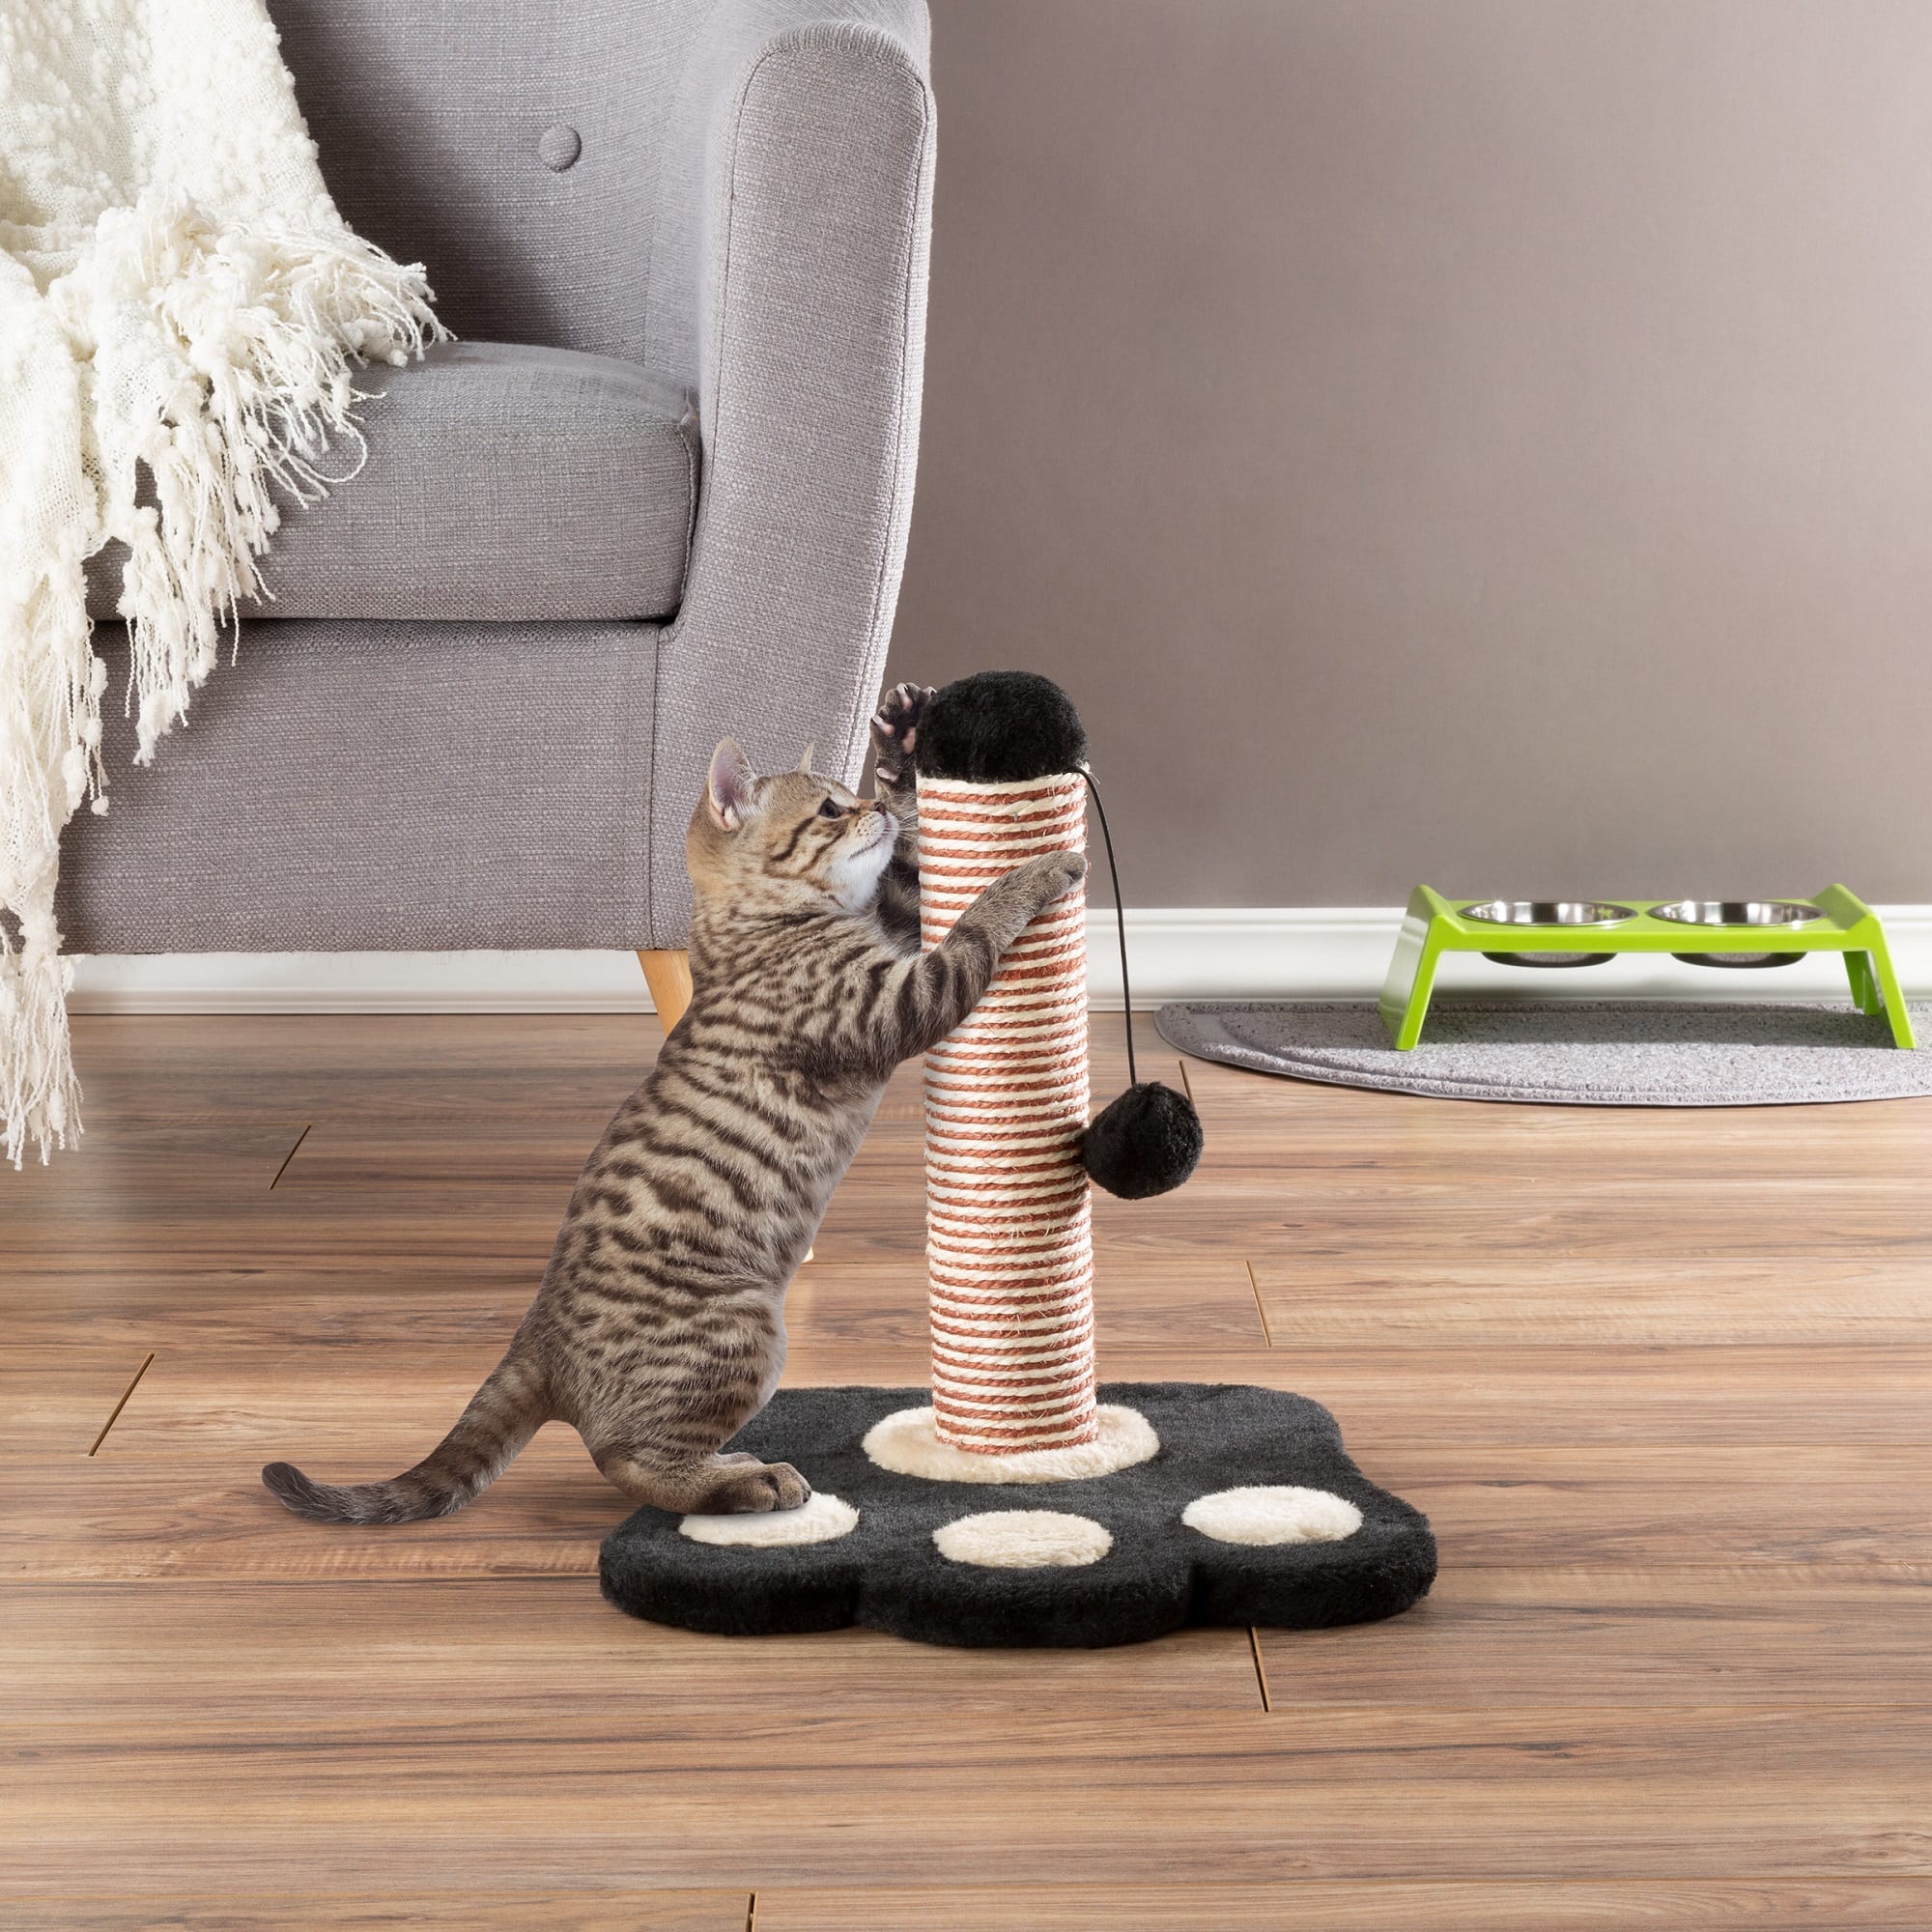 GOHOO PET Cat Scratching Post Kitten Claw Scratcher Toy with Natural Sisal Rope and Track Ball 25.2’’ Tall, Wand Toy Sturdy Wooden Base 